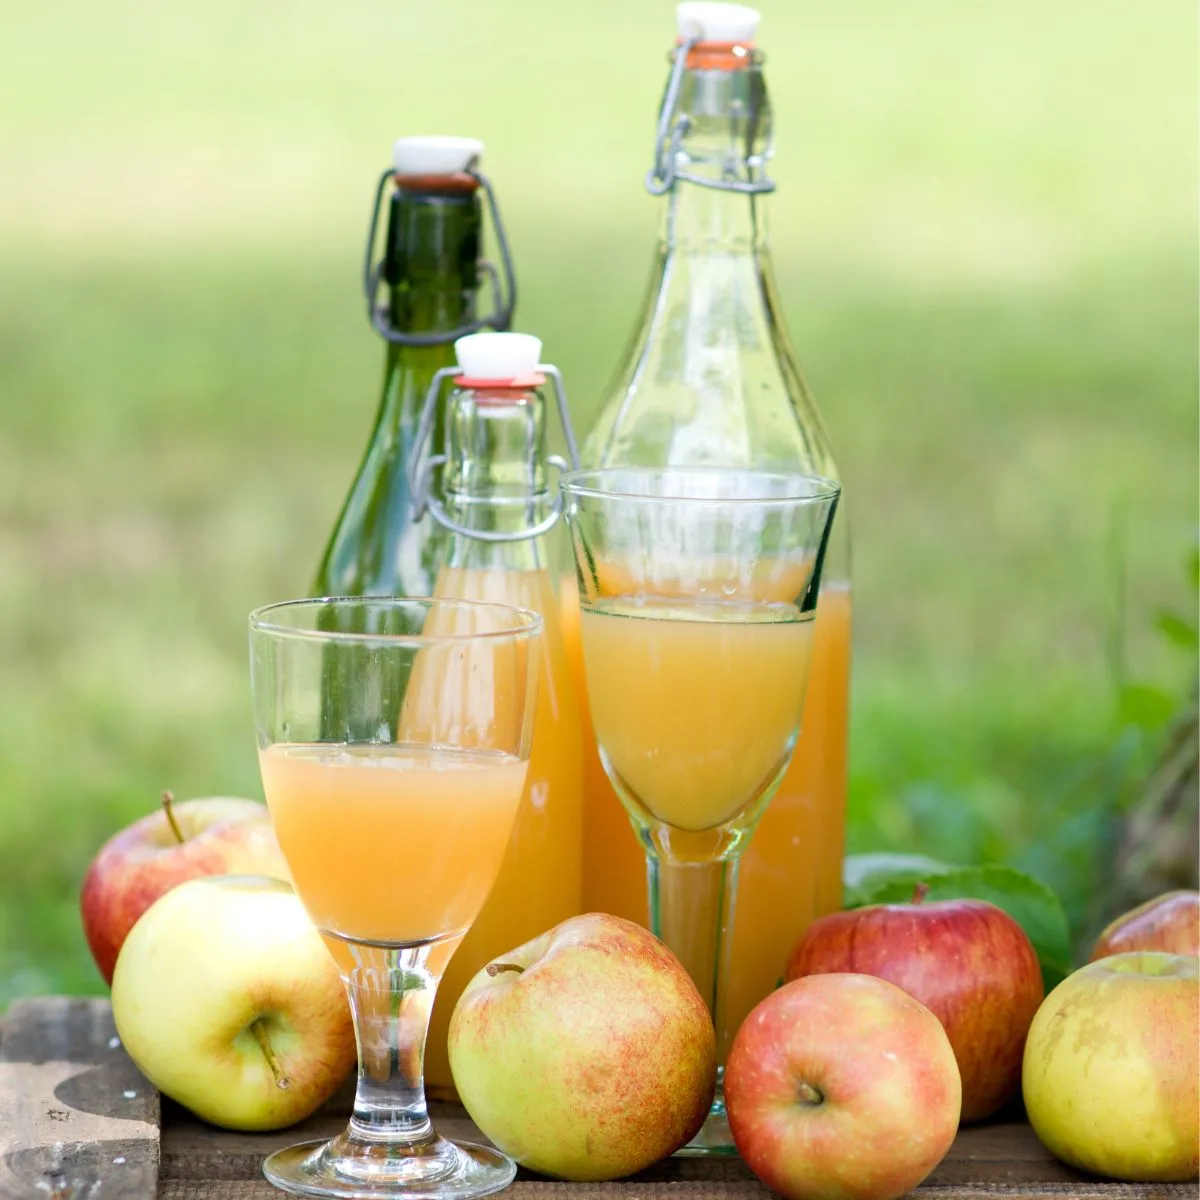 apple juice in glasses and bottles